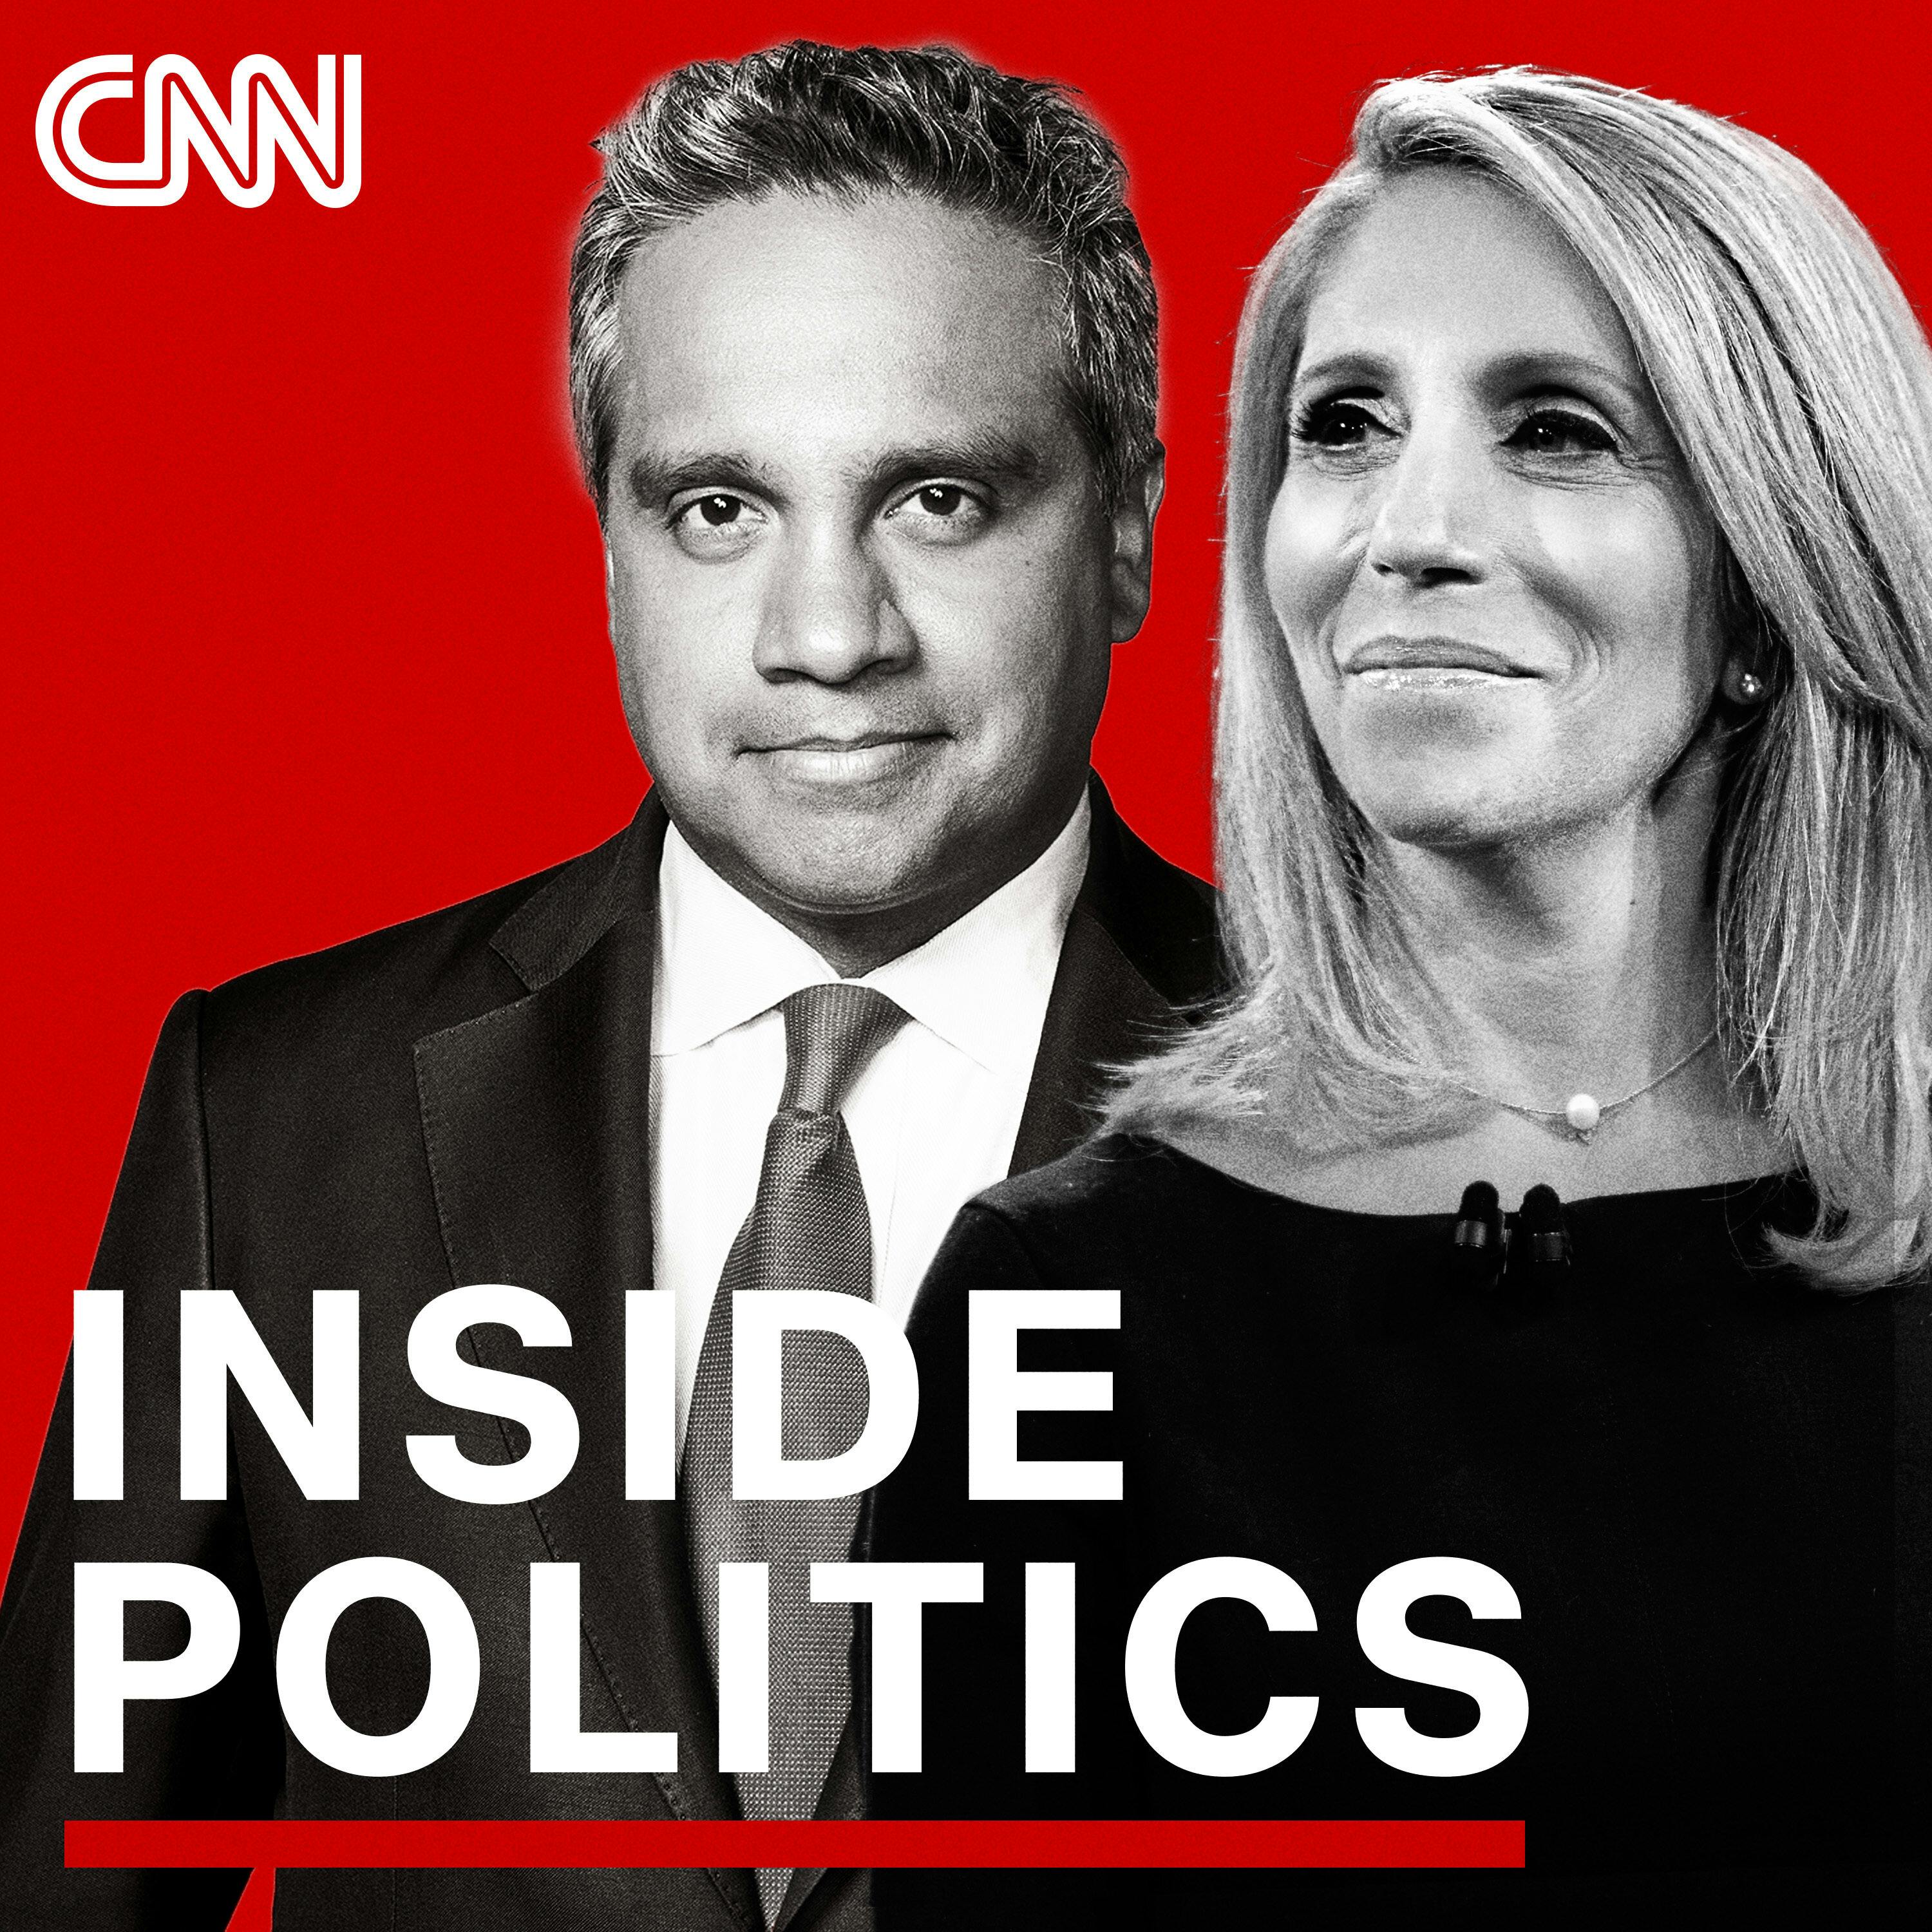 Inside Politics Podcast Update For Monday, August 23, 2021